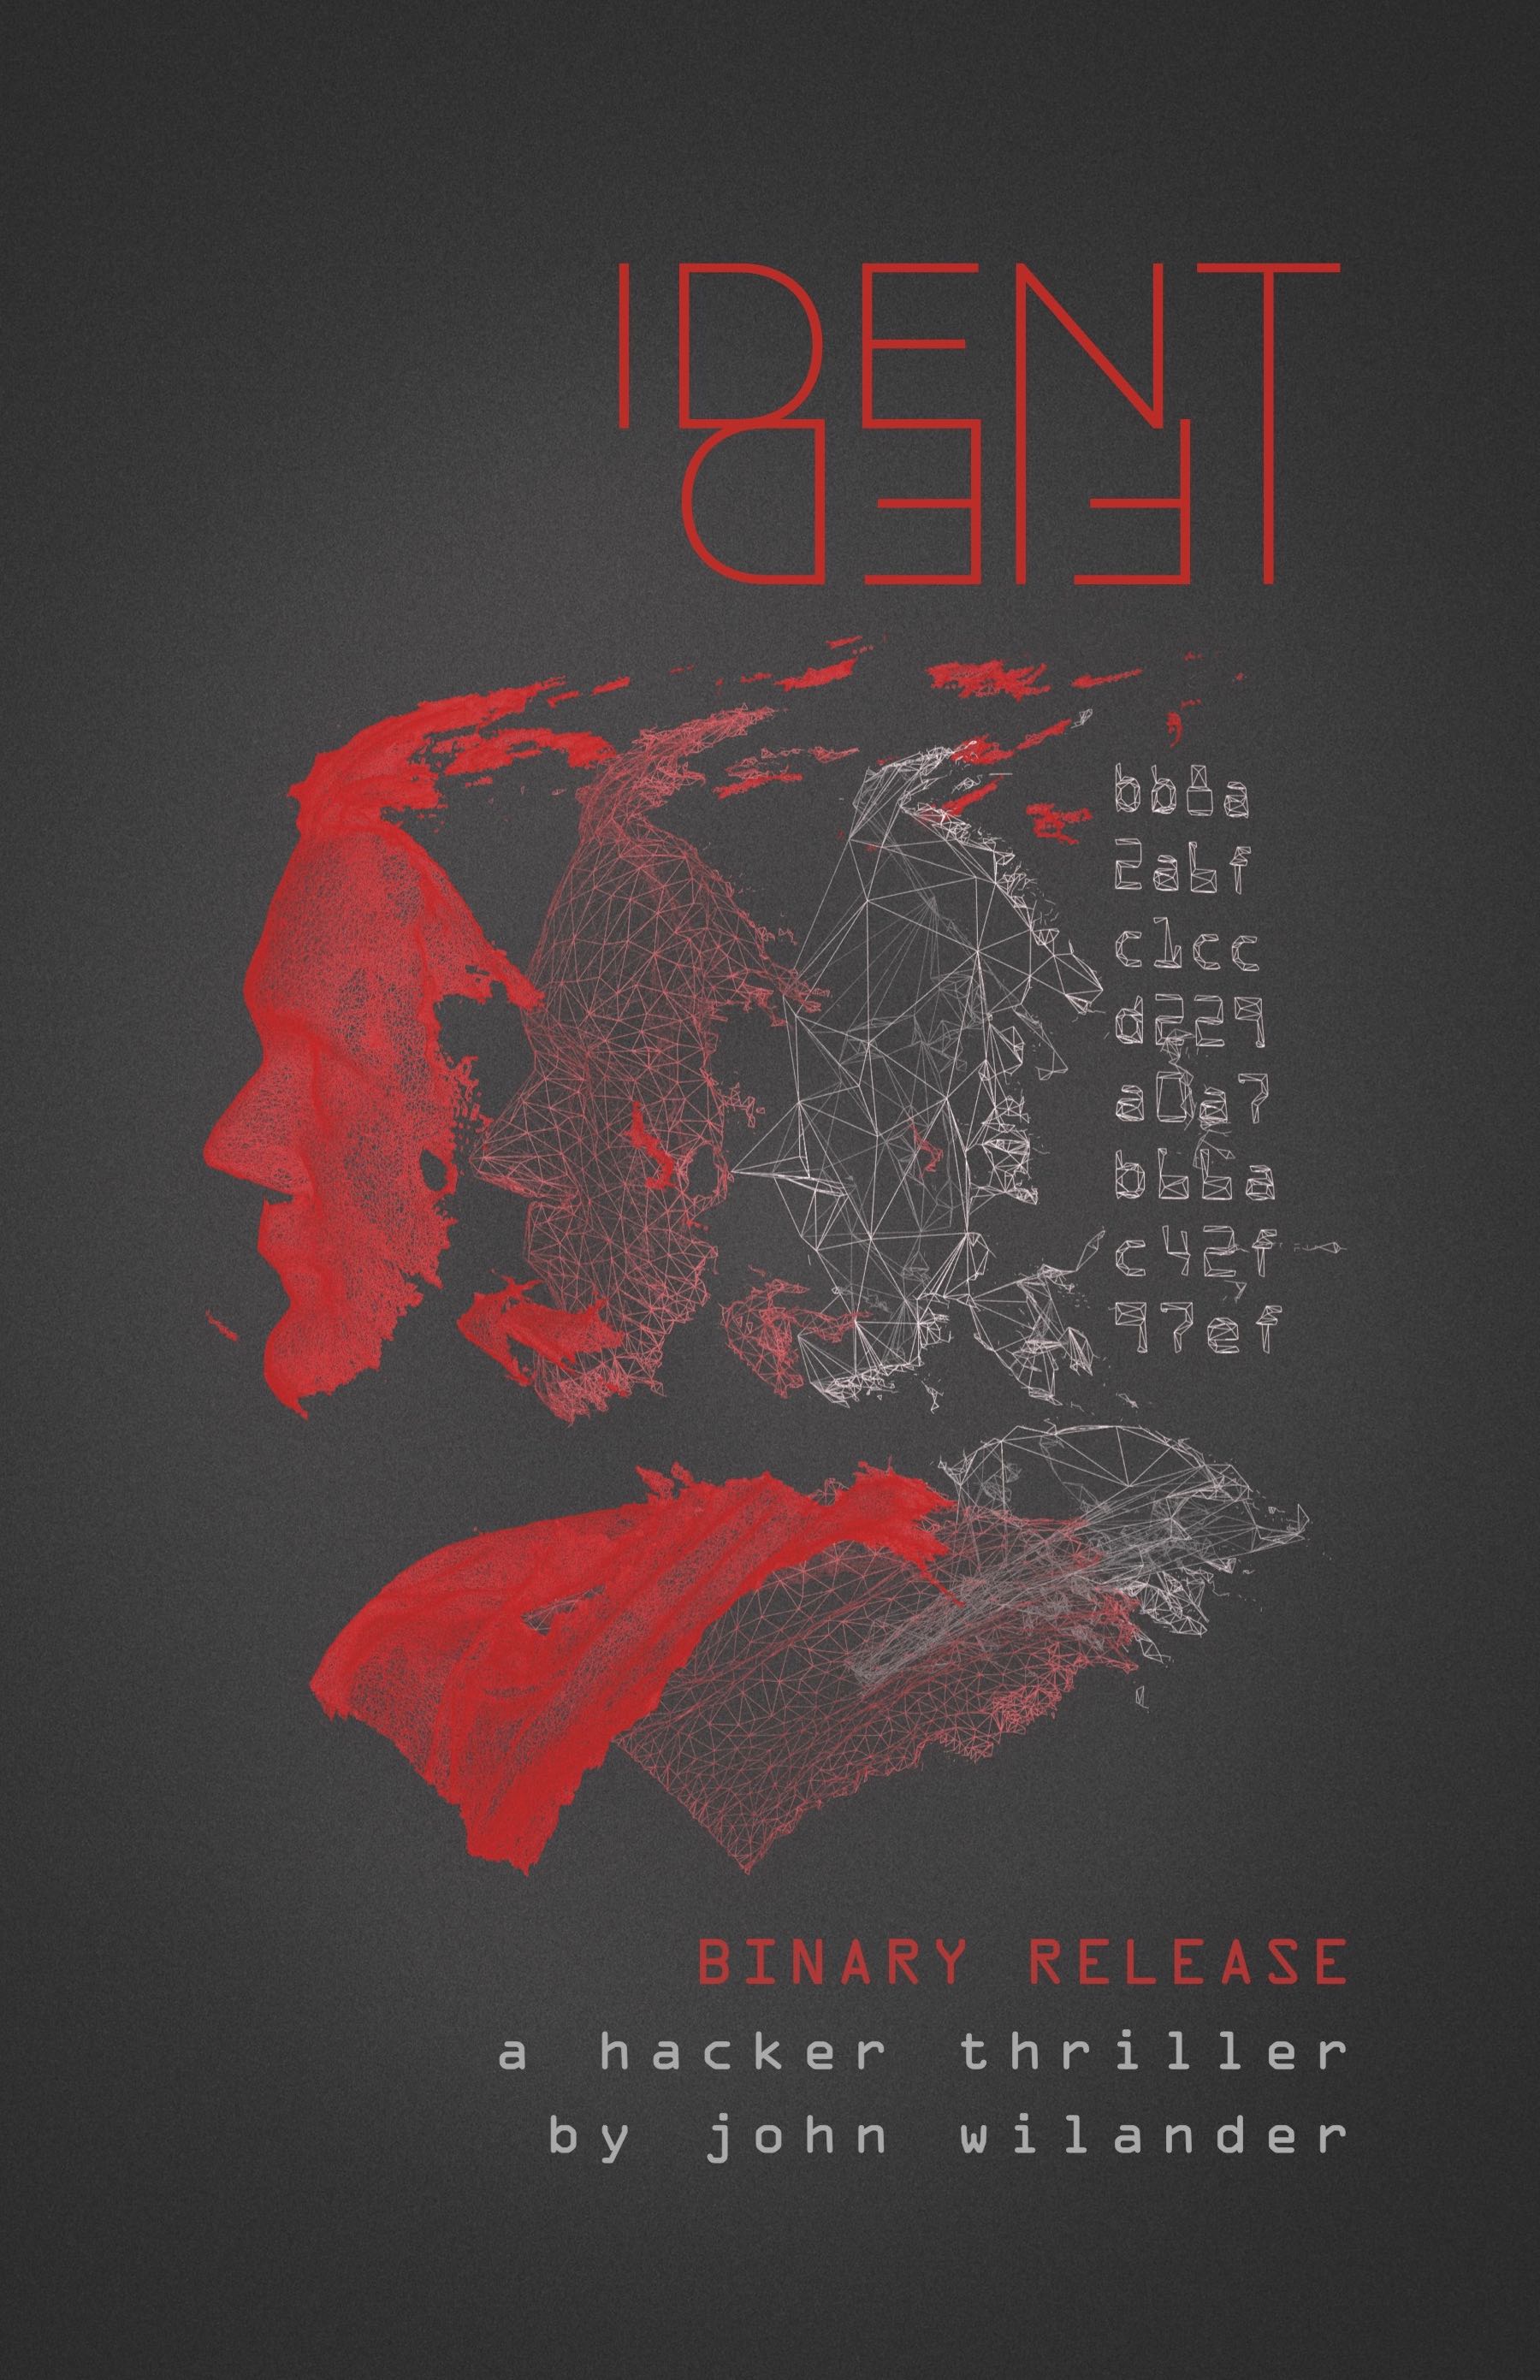 A rectangular book cover with dark gray background, a stylized title Identified at the top, a facial recognition model in four stages going from refined to vectorized to a single user ID, and the text Exclusive Binary Release, a hacker thriller by John Wilander.